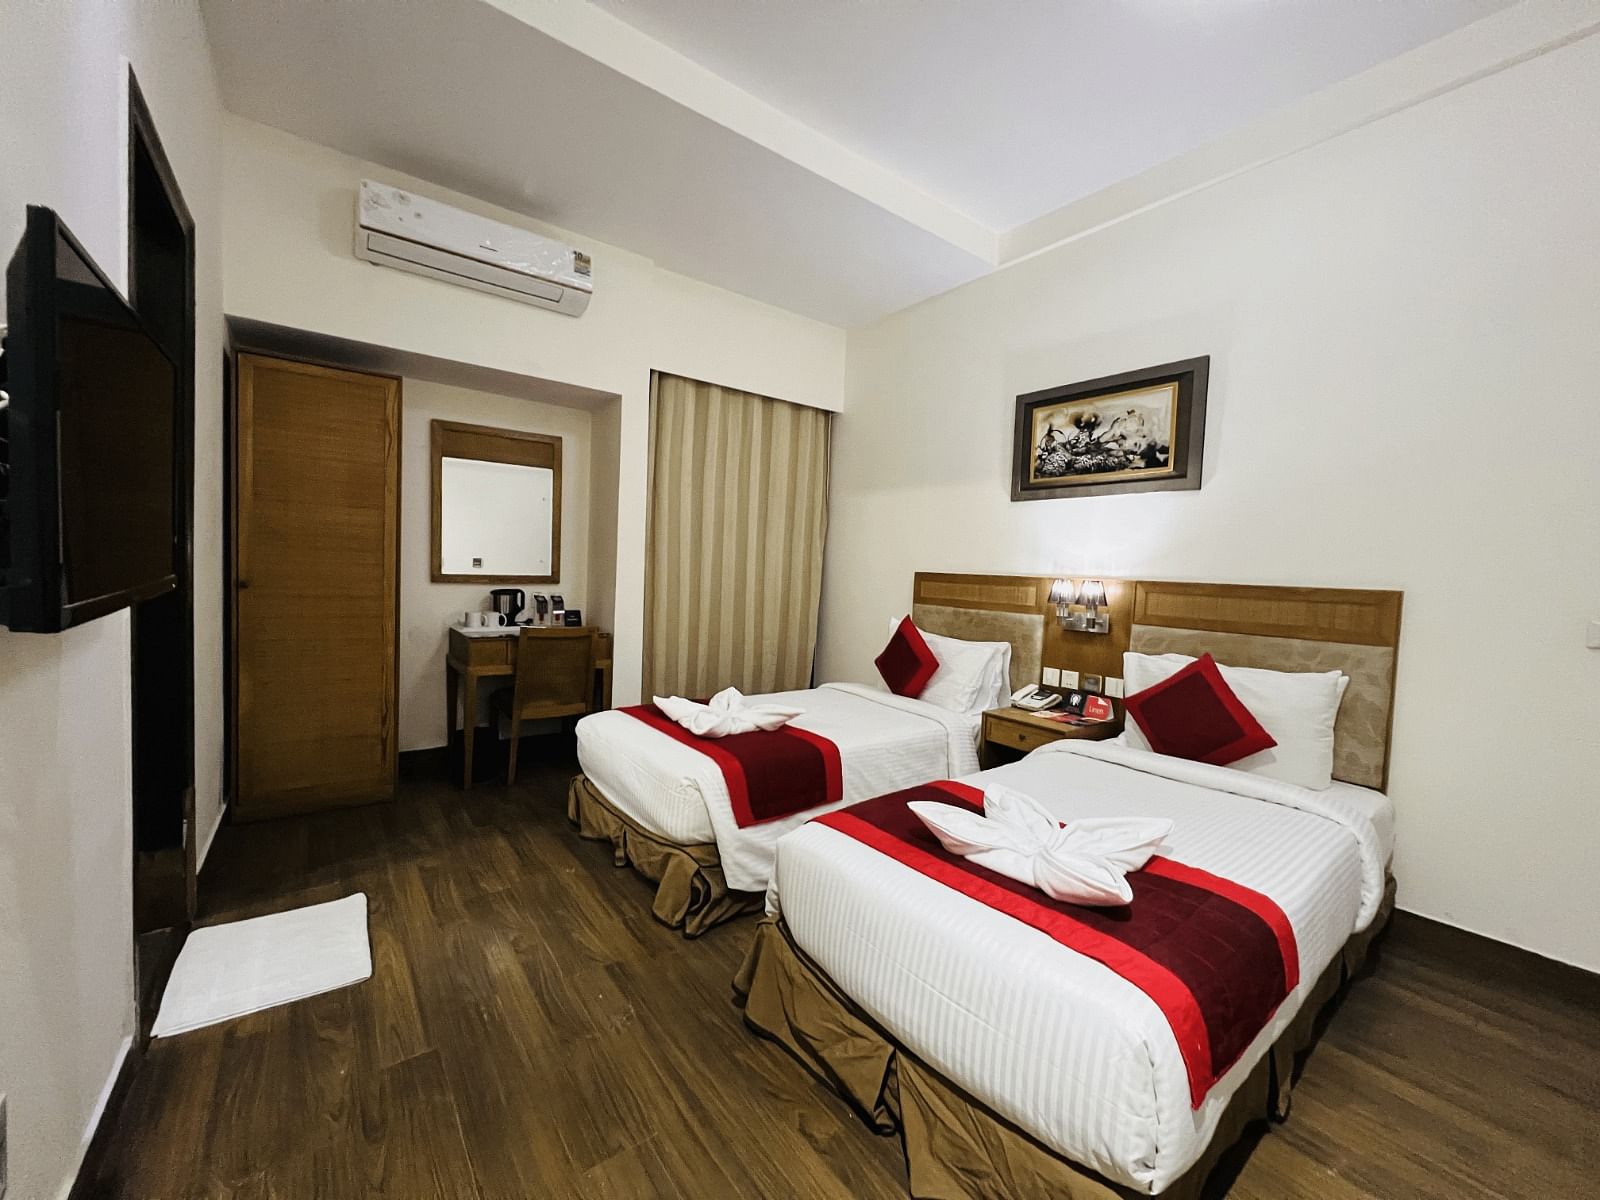 Zip By Spree Hotels in Greater Kailash 2, Delhi